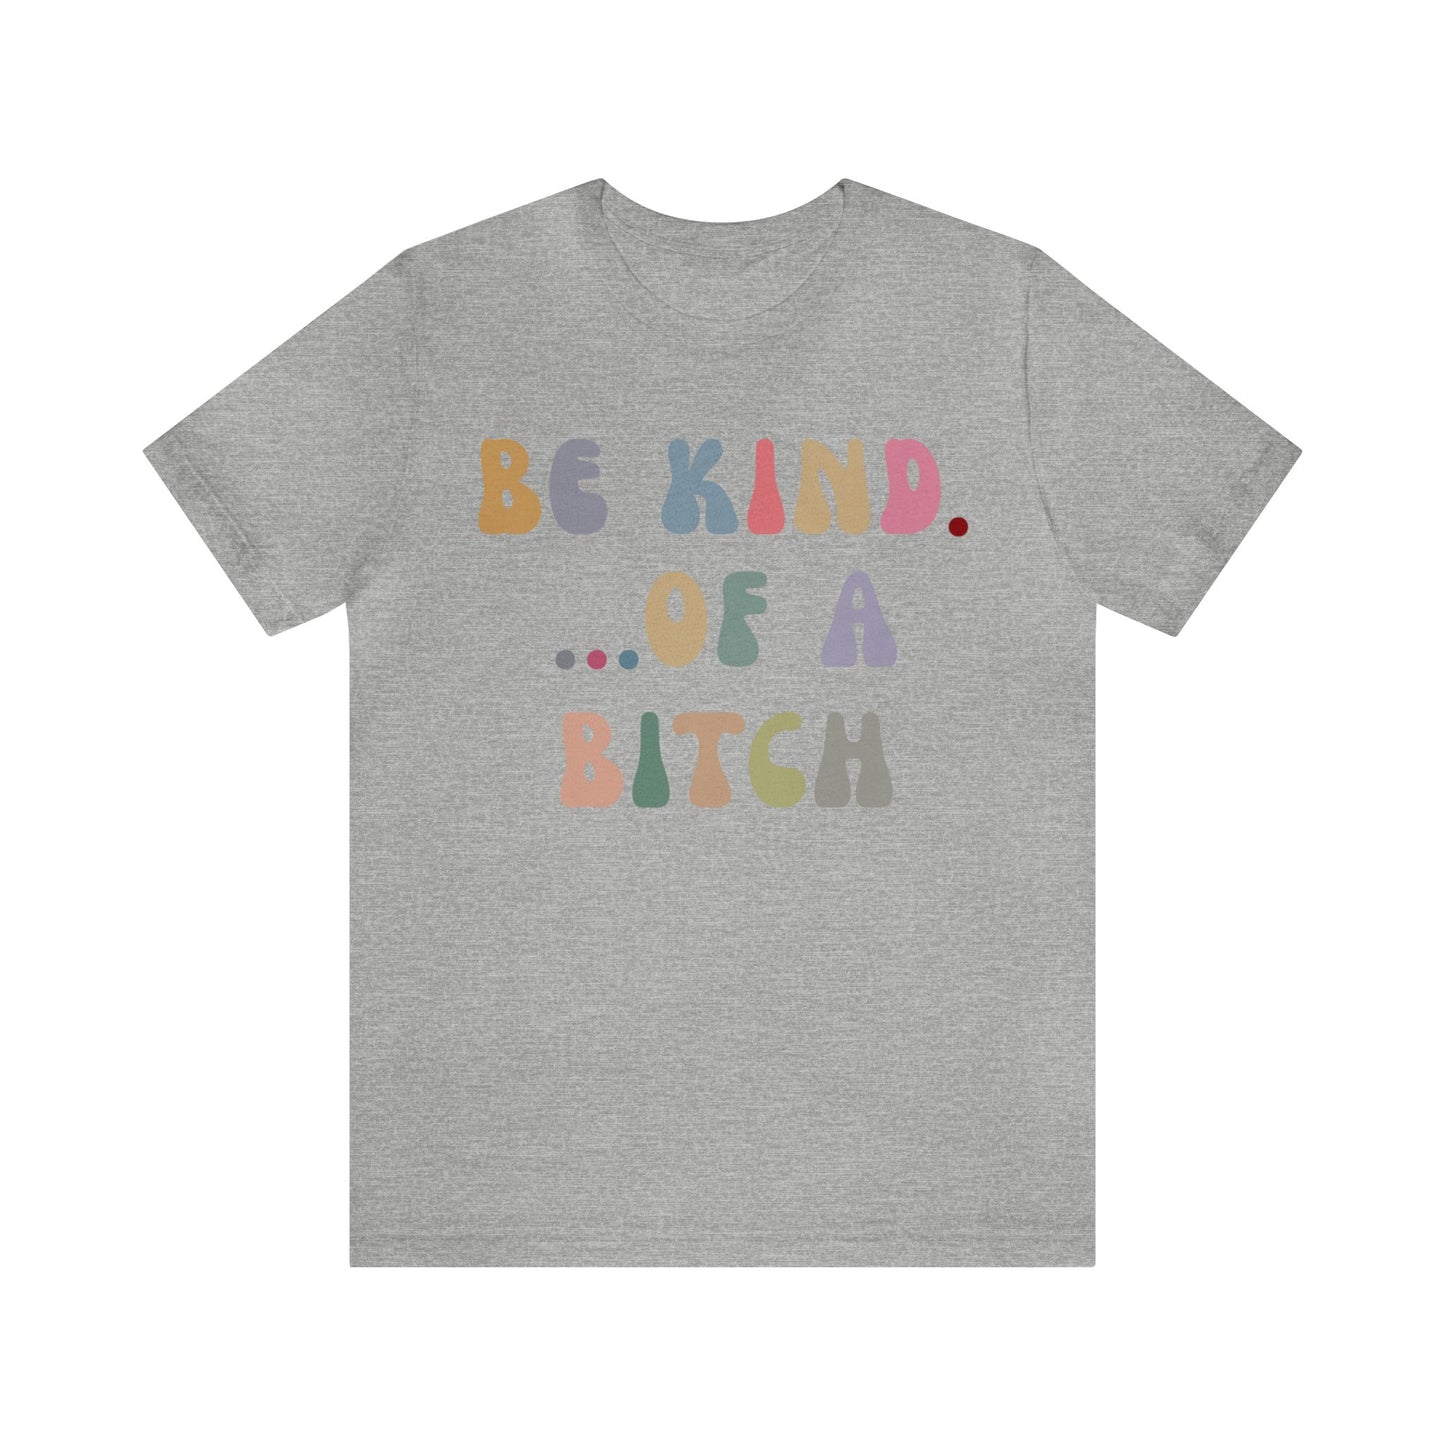 Be Kind Of A Bitch Shirt, Funny Girls Shirt, Funny Sassy Shirt, Sarcasm Shirt for Women, Funny Gift for Friends, Gift For Girls, T1198